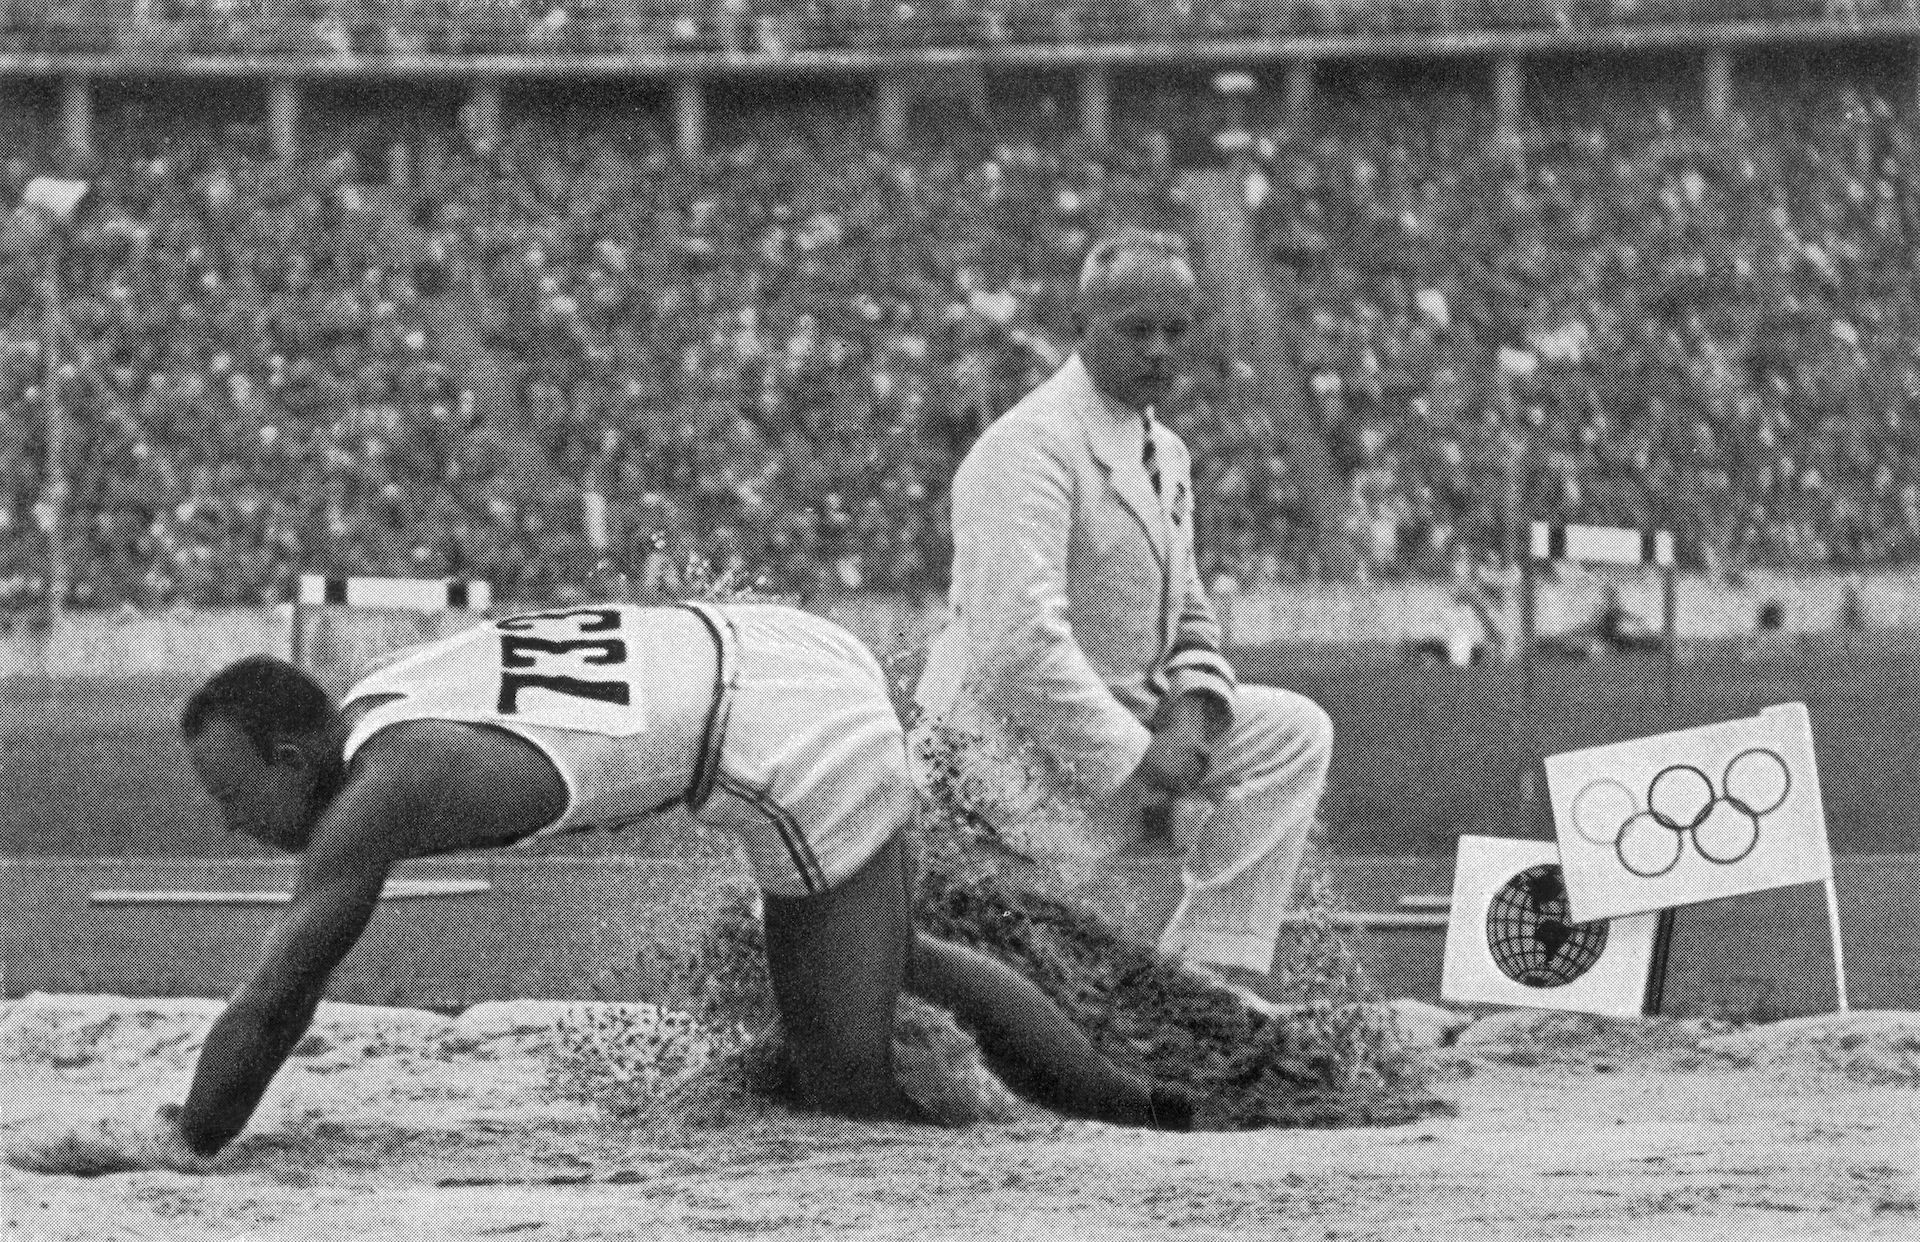 Jesse Owens’ granddaughter unveils World Heritage Plaque to mark ‘Day of Days’